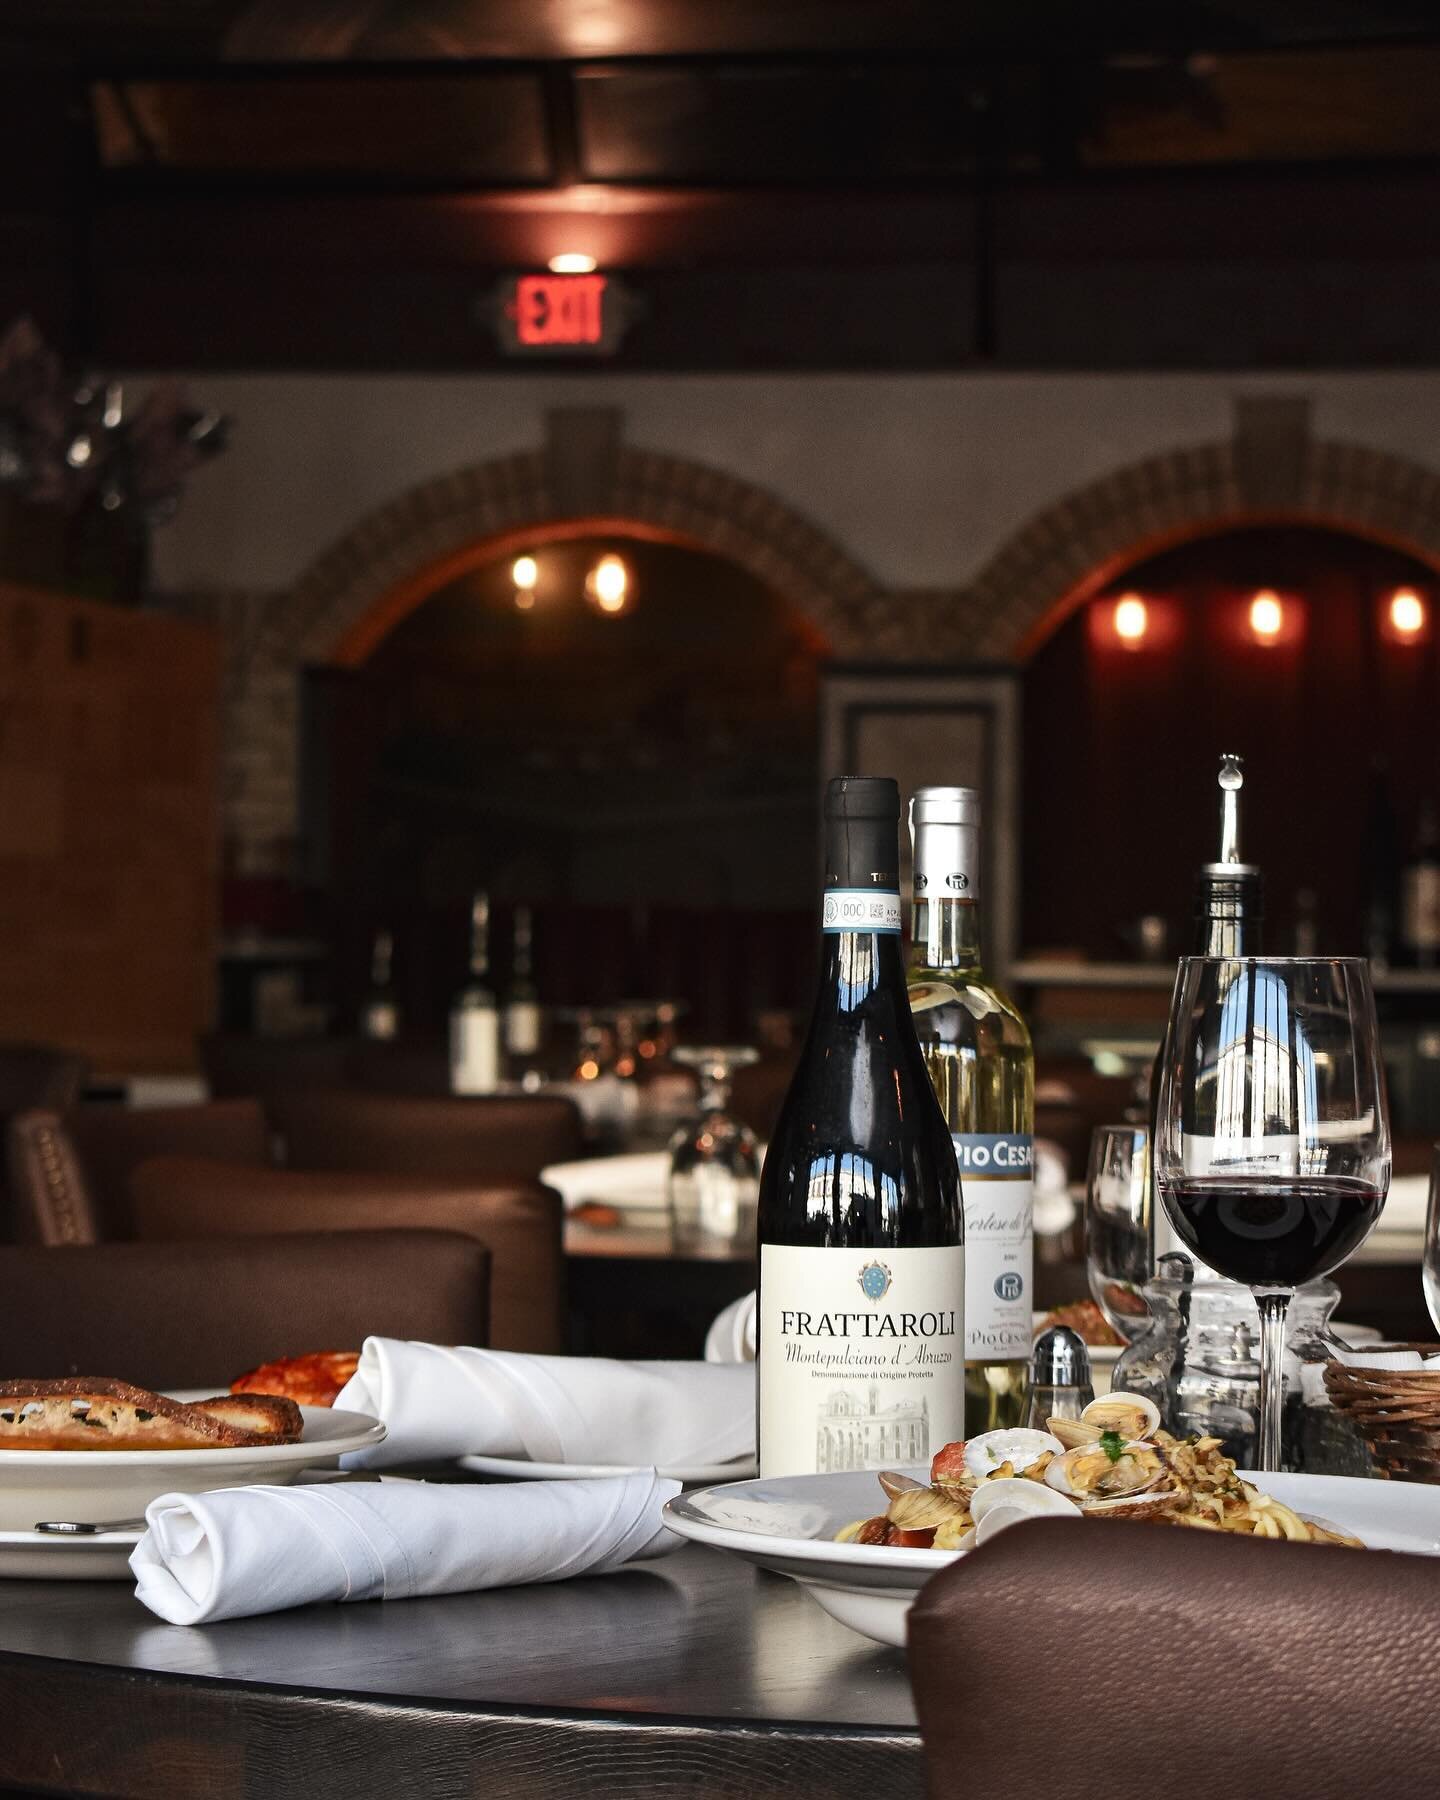 Plan your next date night with us for an Italian experience!&nbsp;Authentic cuisine, Italian art, and wines from the heart of Italy. Reserve your table today&nbsp;🇮🇹

#Italianfood #datenight&nbsp;#Italianwine&nbsp;#bostoneats&nbsp;#foodietravel